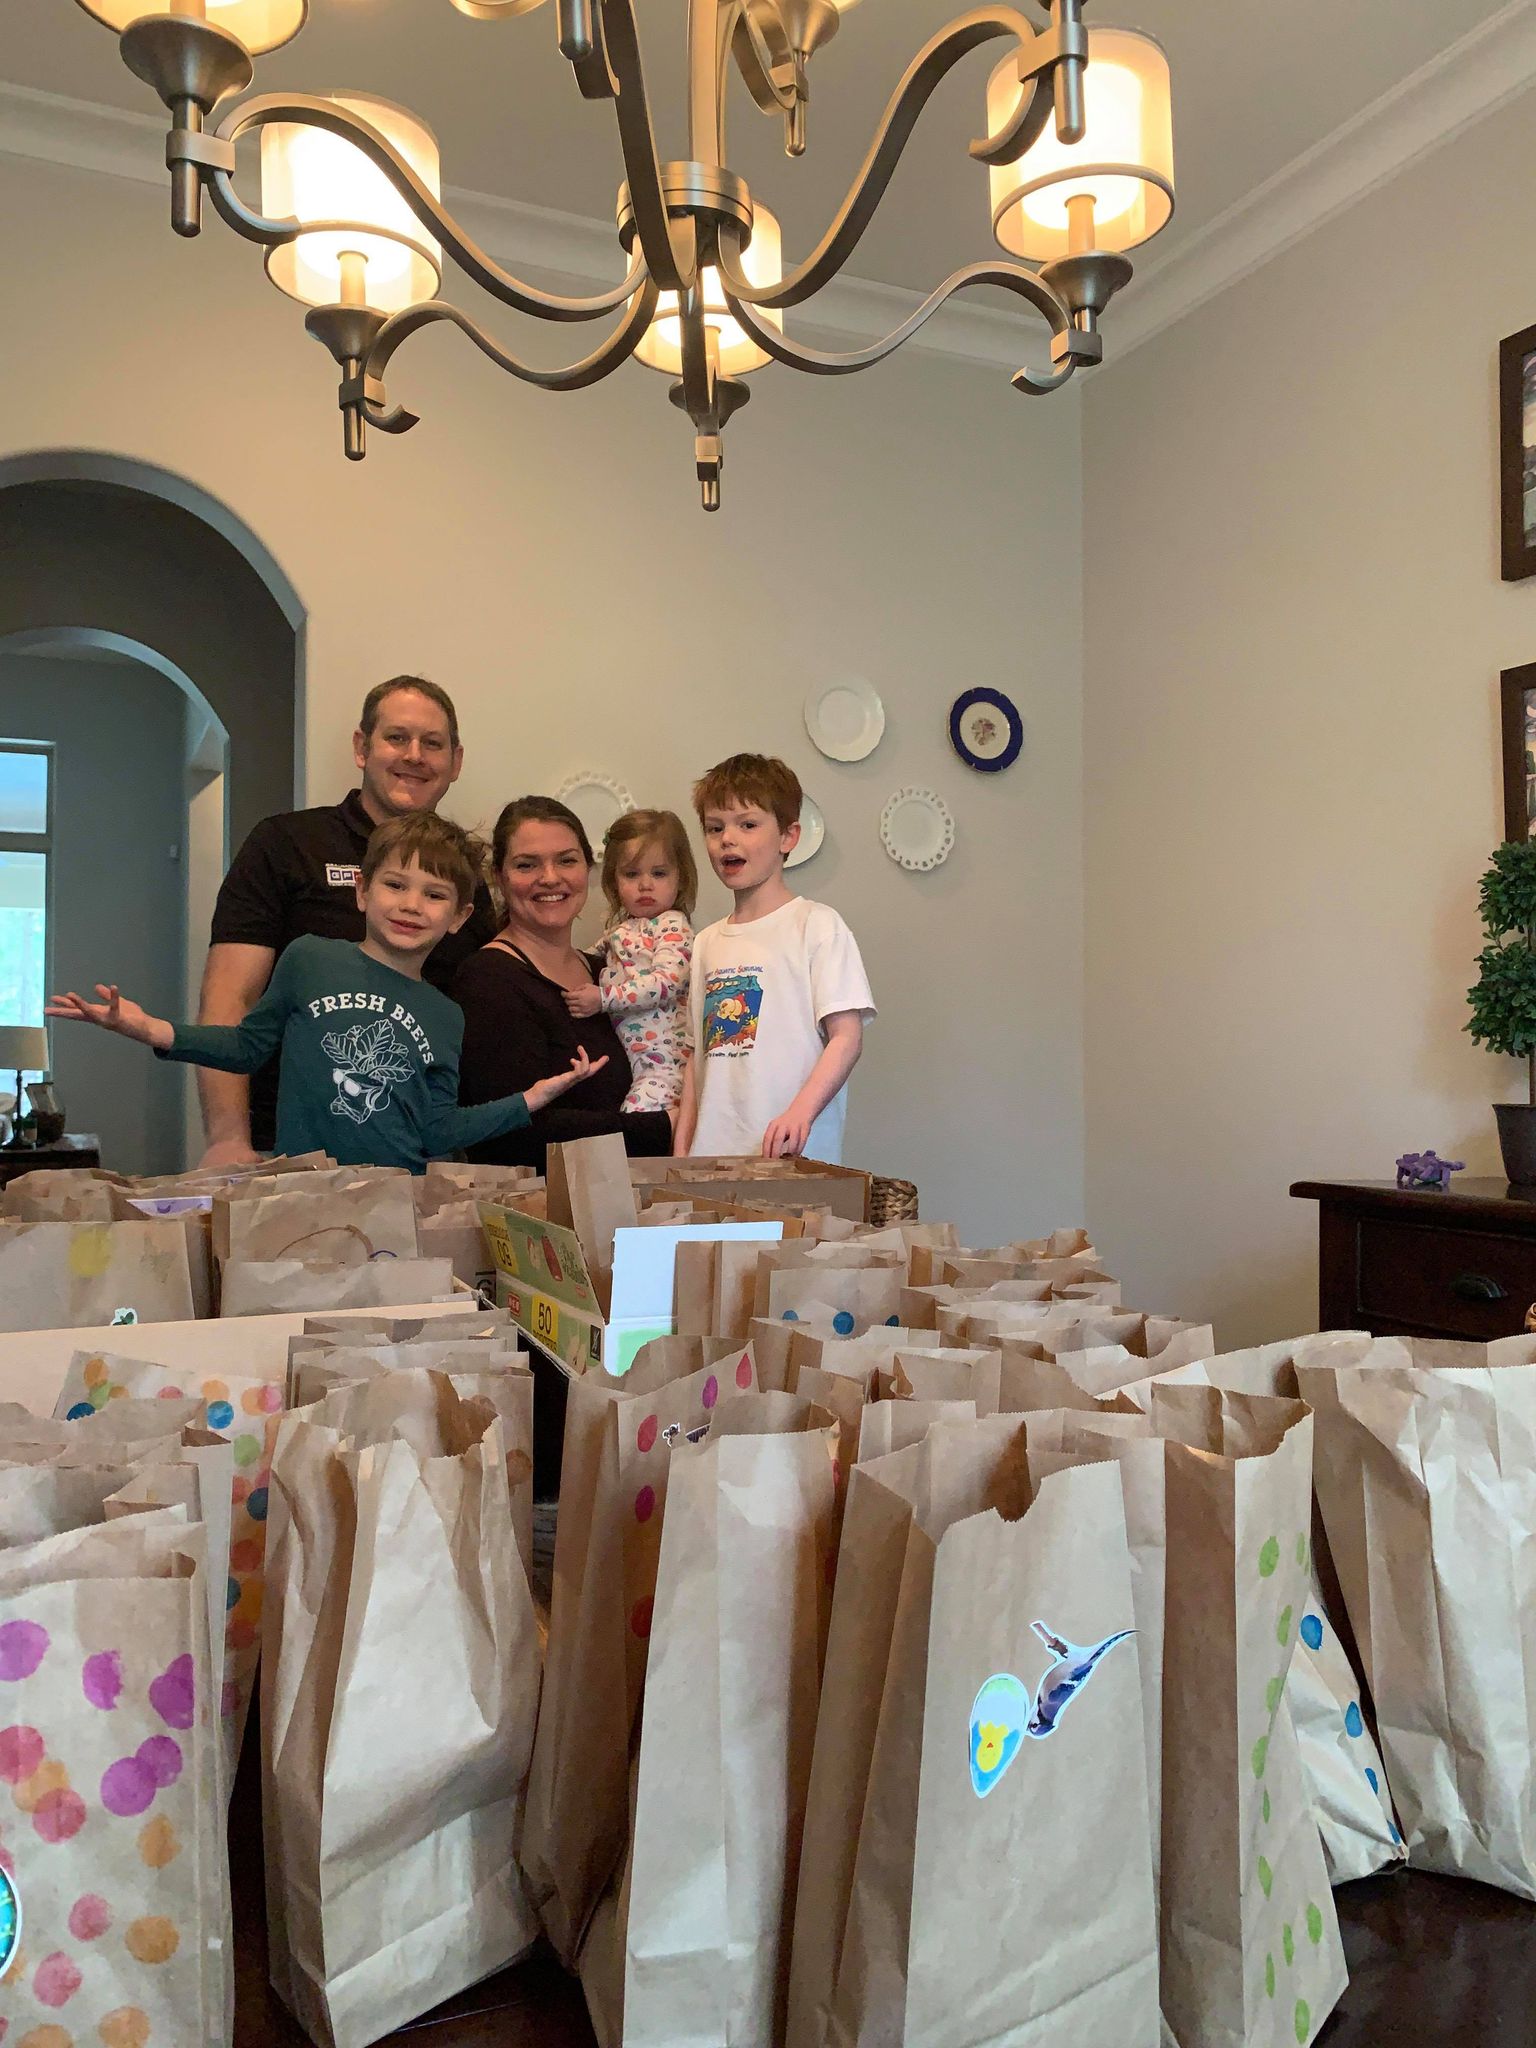 family packs lunches for kids in need